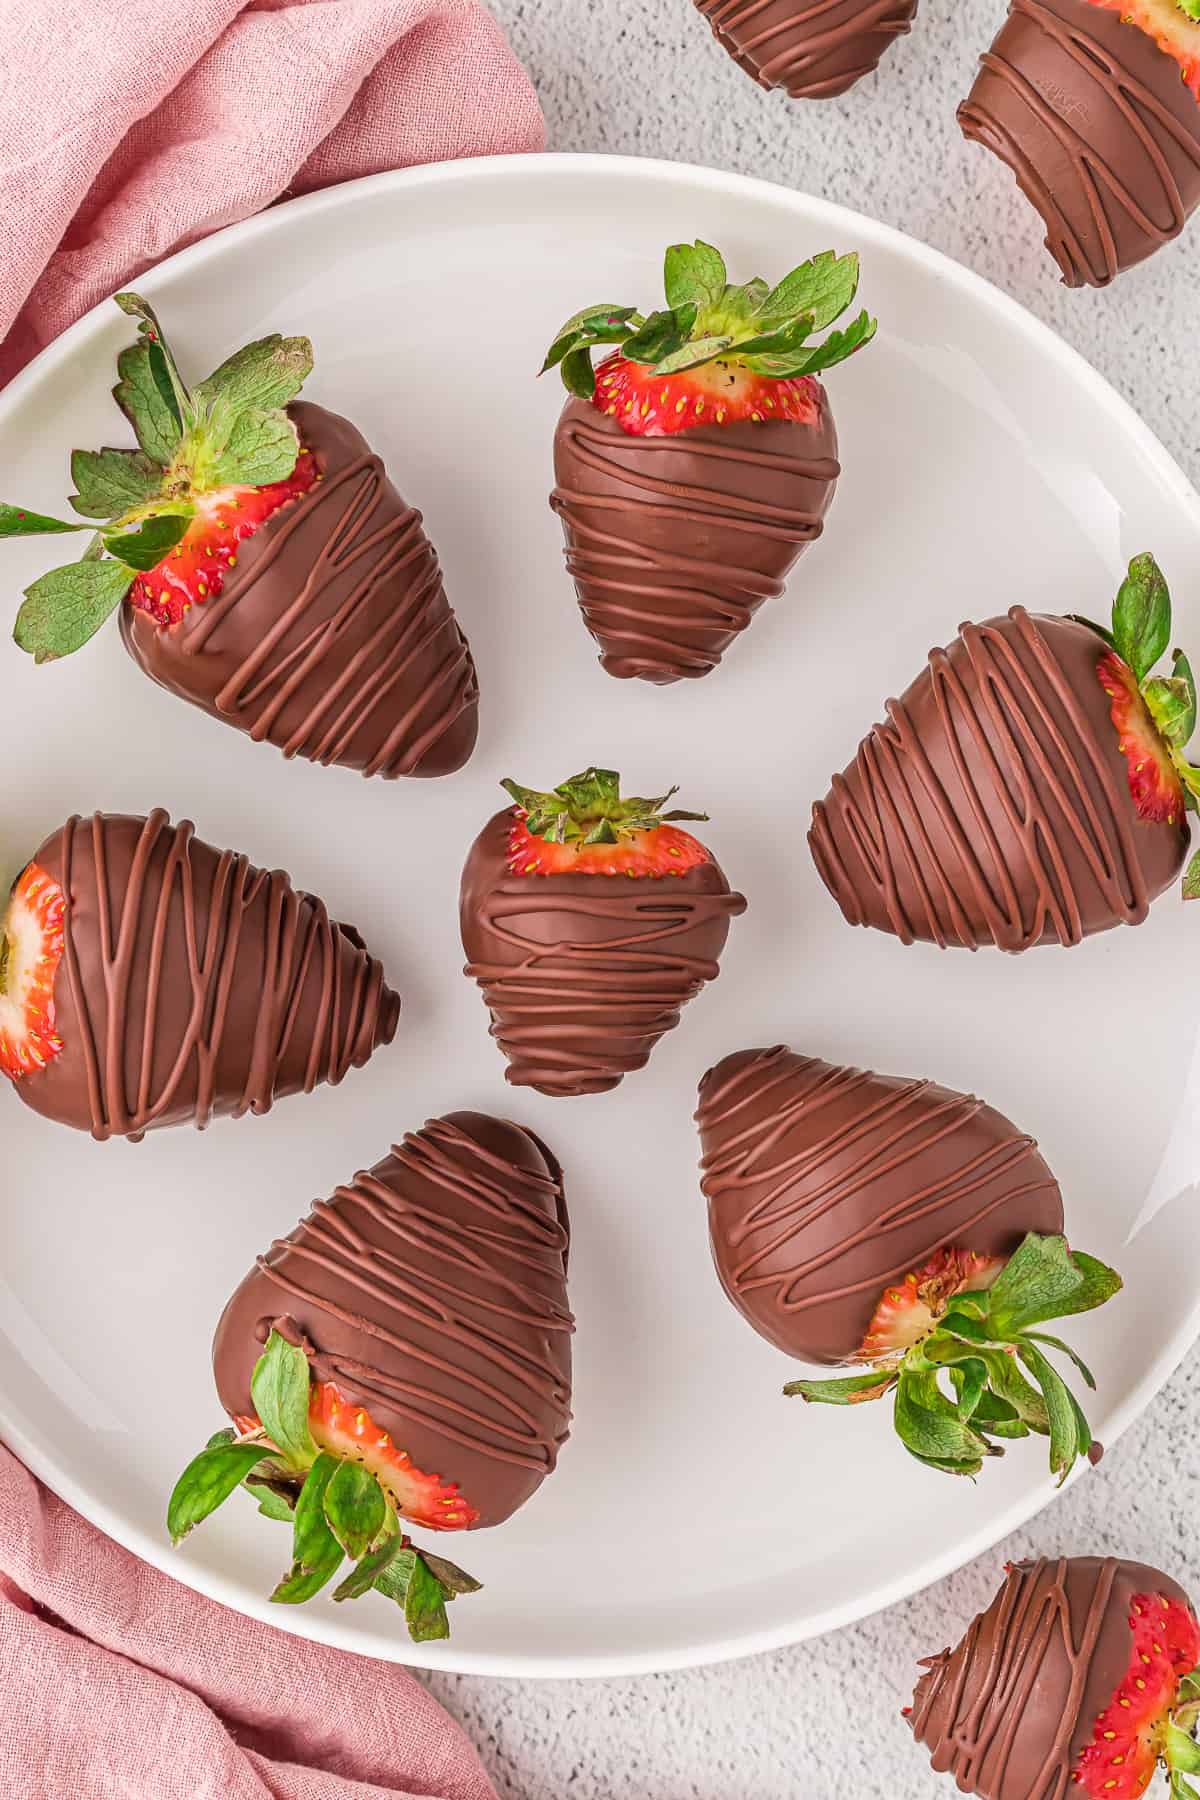 Vegan chocolate covered strawberries on a white plate.